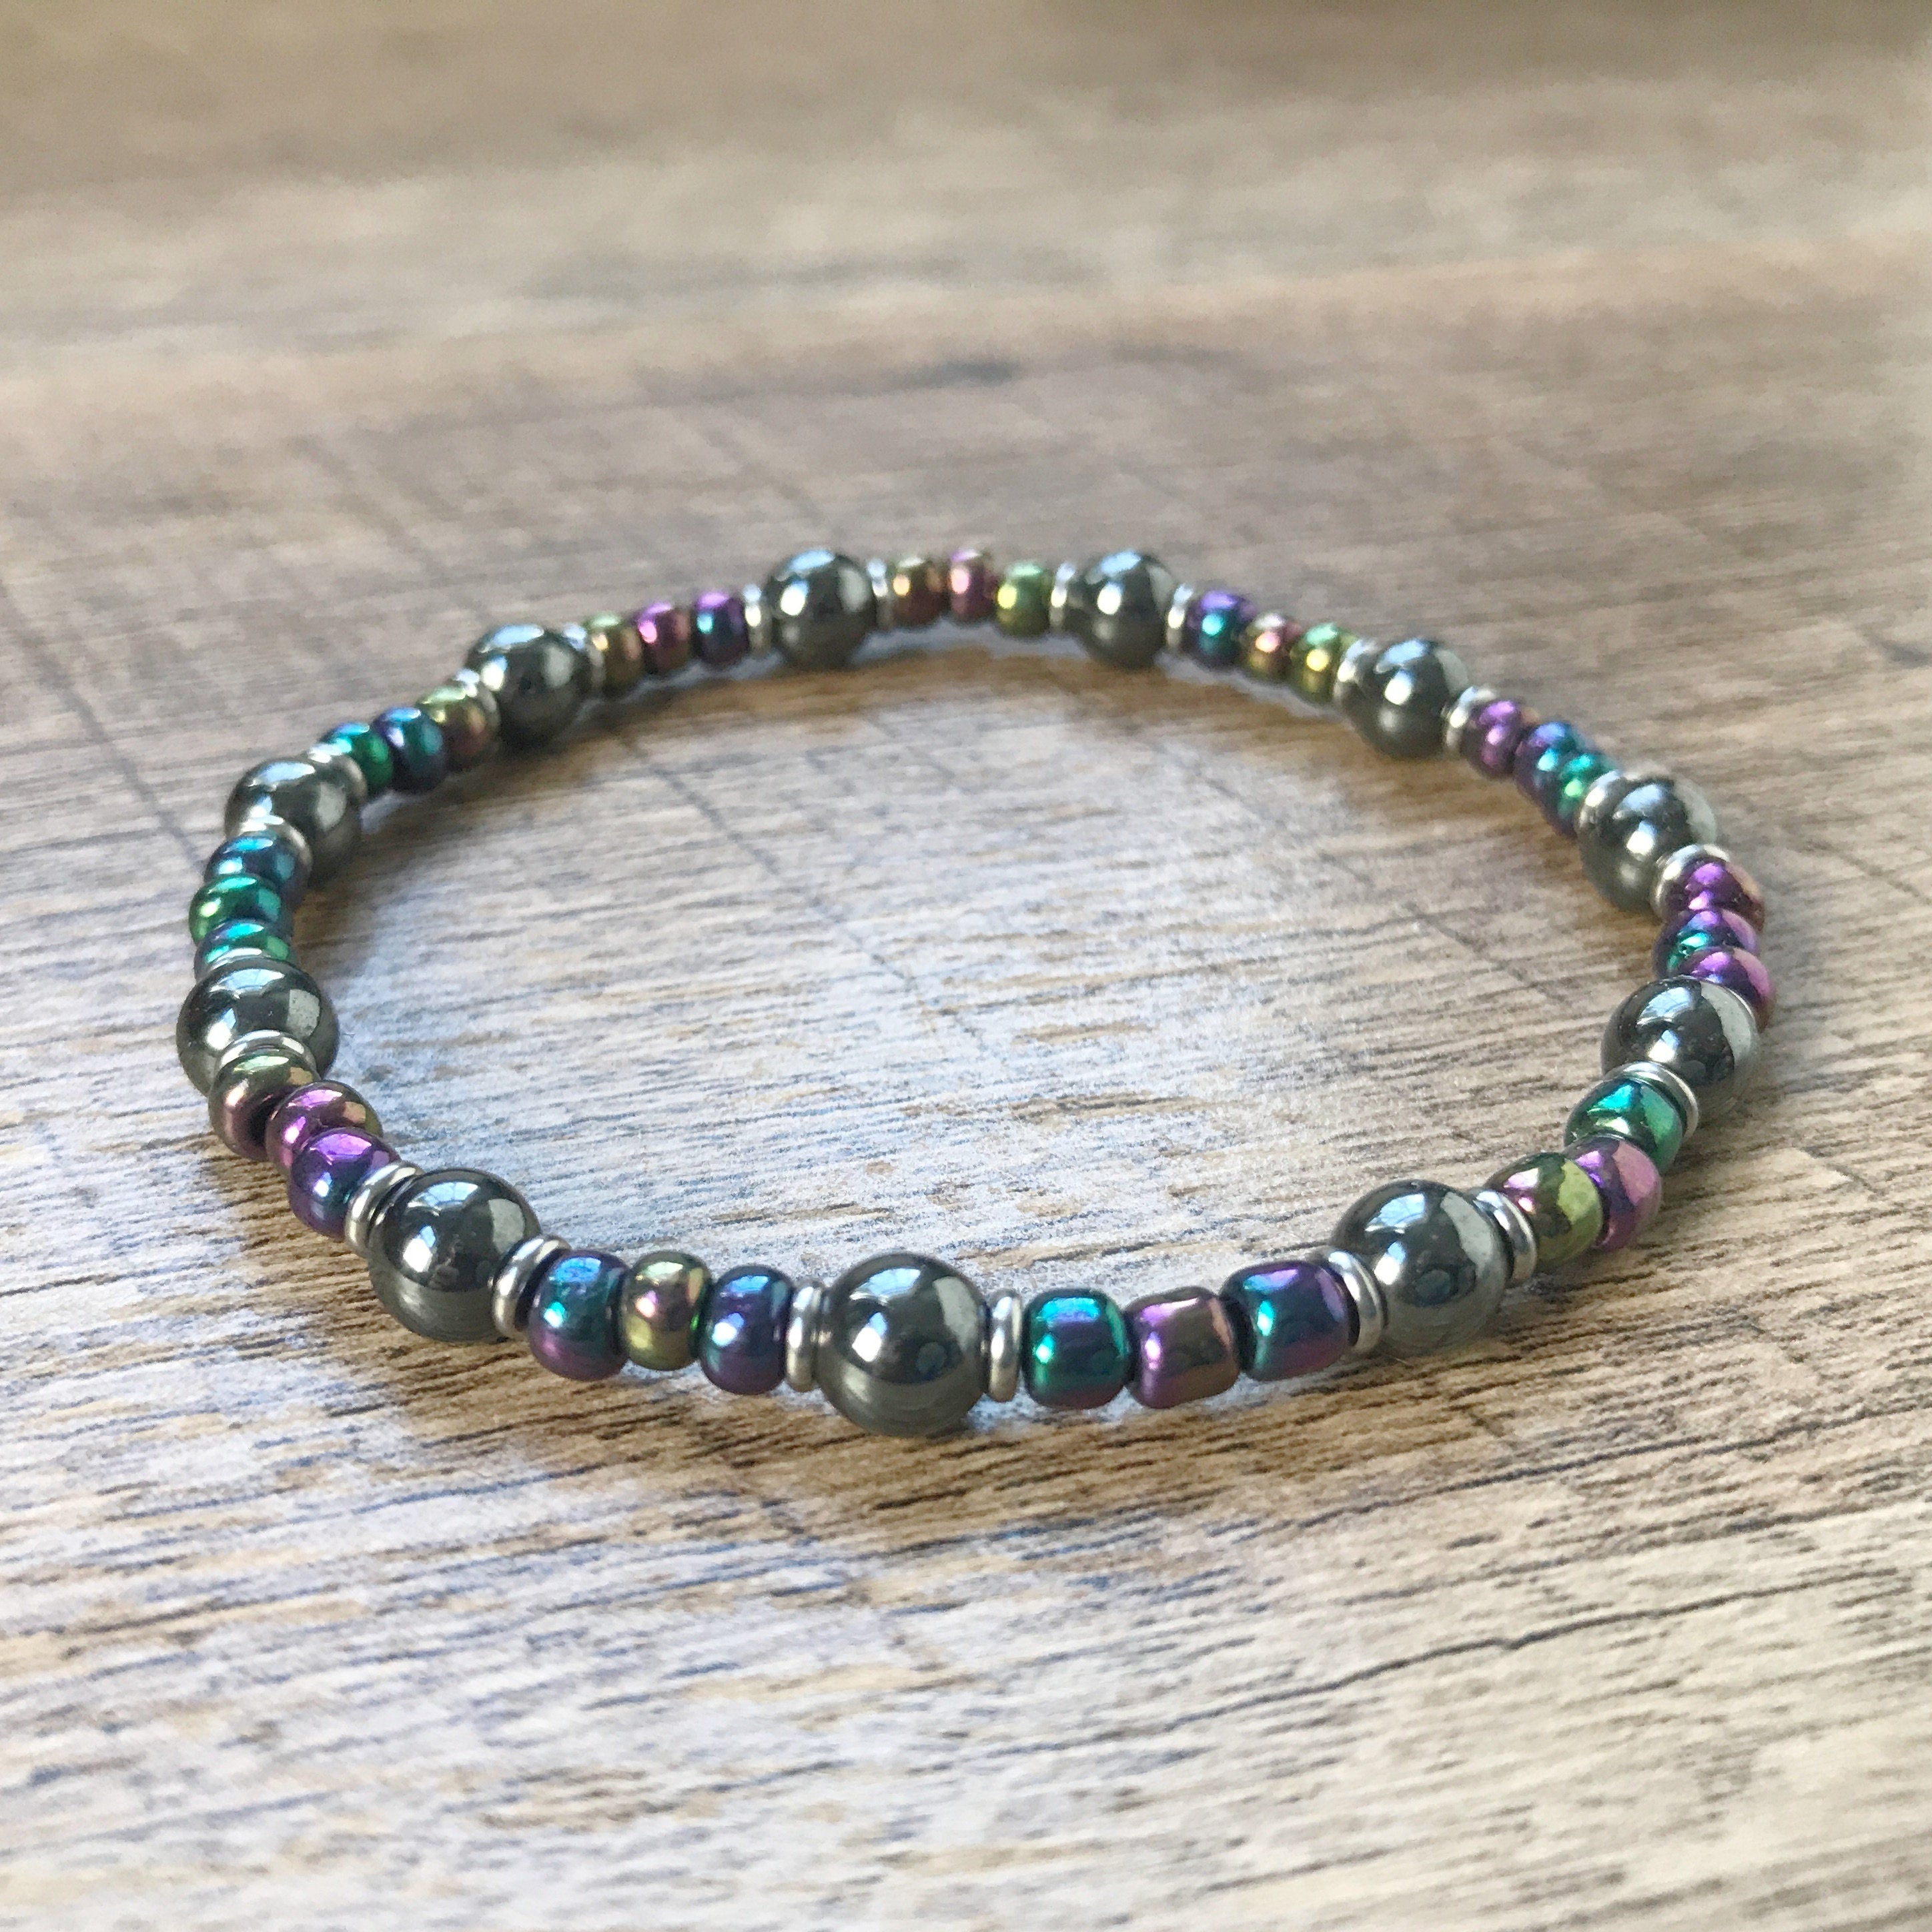 Rainbow-coated hematite bracelet (stretchy) with charm - Made by Marianne